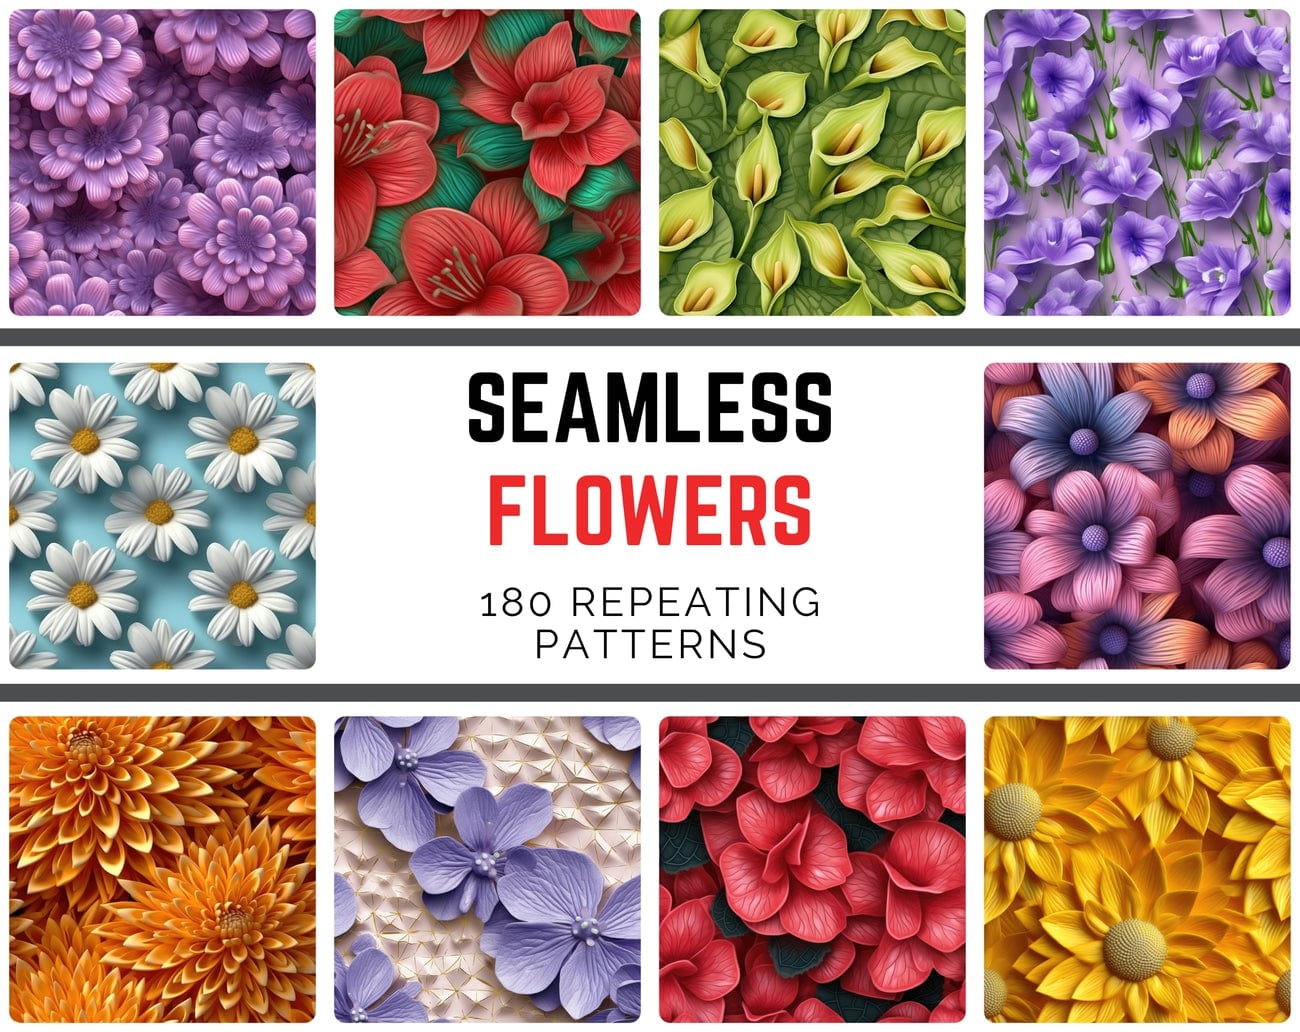 Seamless Floral Backgrounds: 180 High-Quality PNG Images for Commercial Use Digital Download Sumobundle